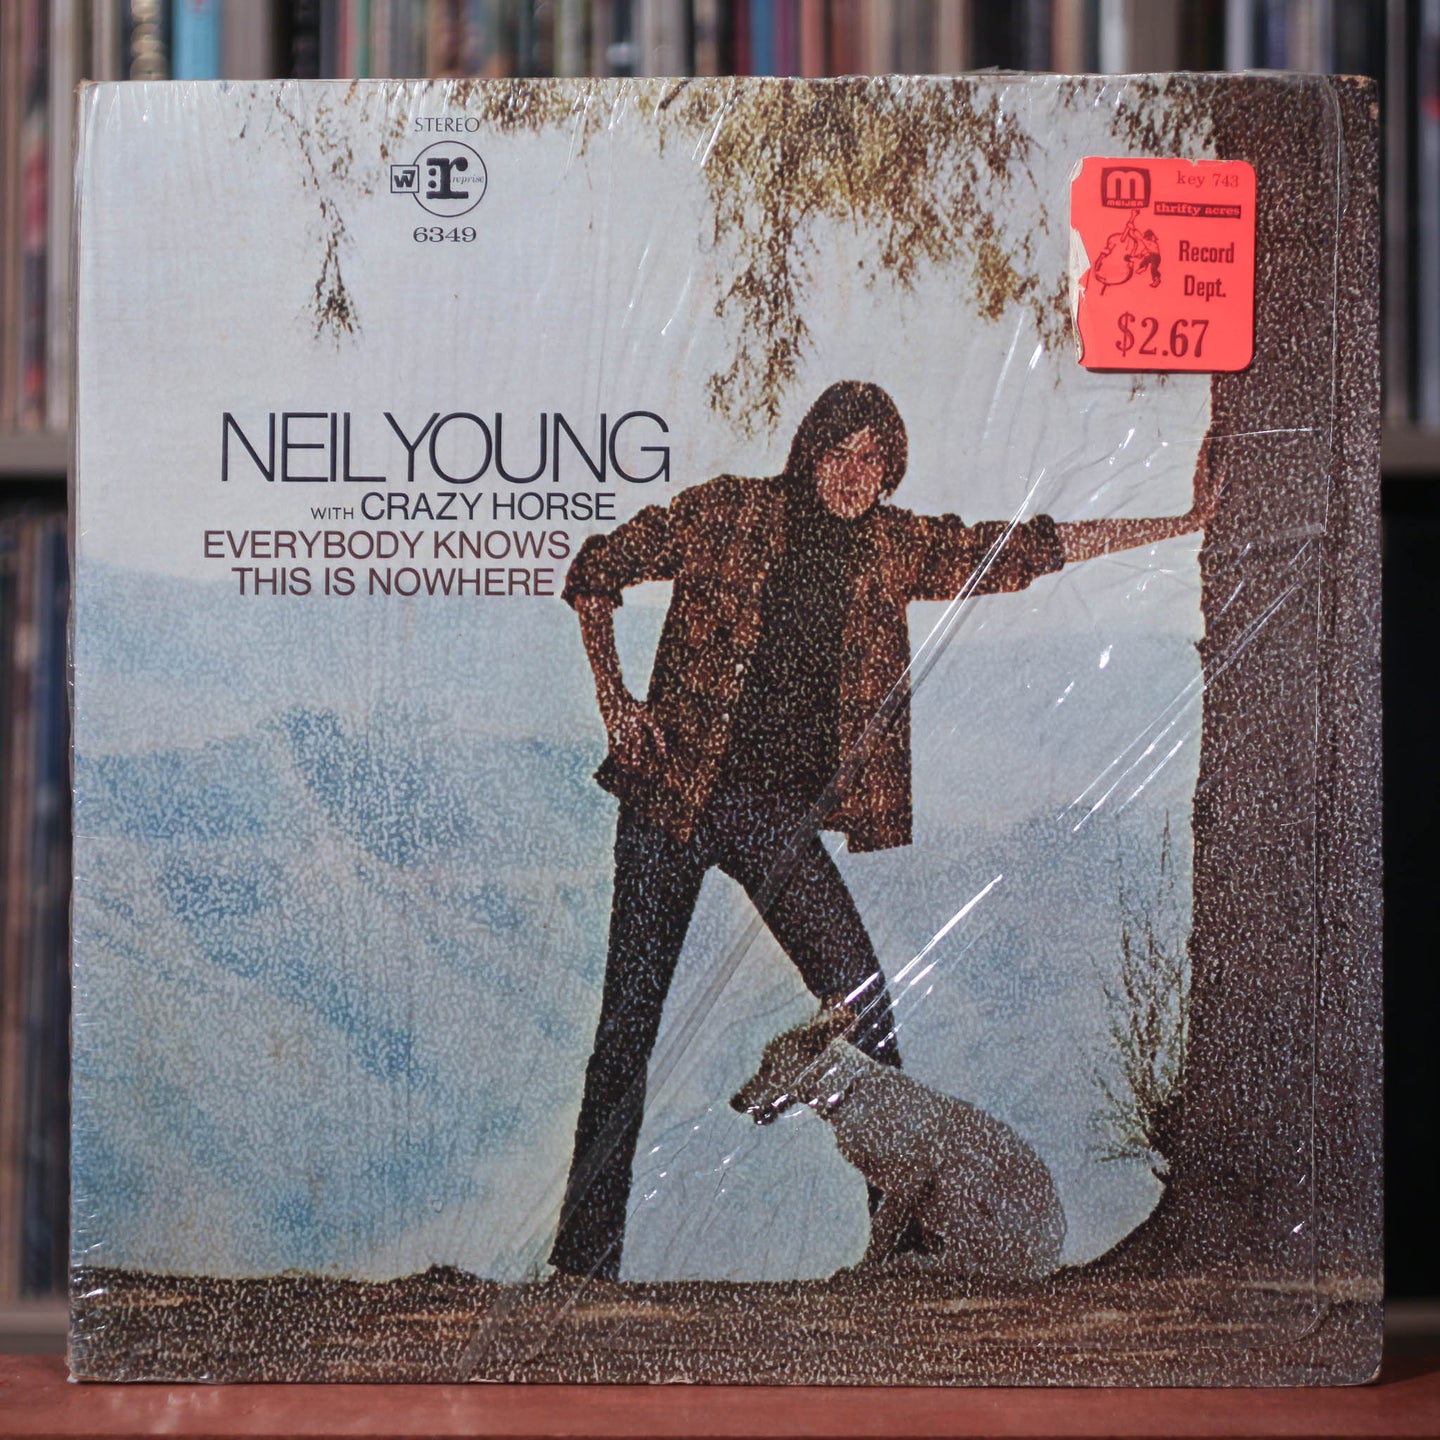 Neil Young - Everybody Knows This Is Nowhere - 1969 Reprise, VG+/VG